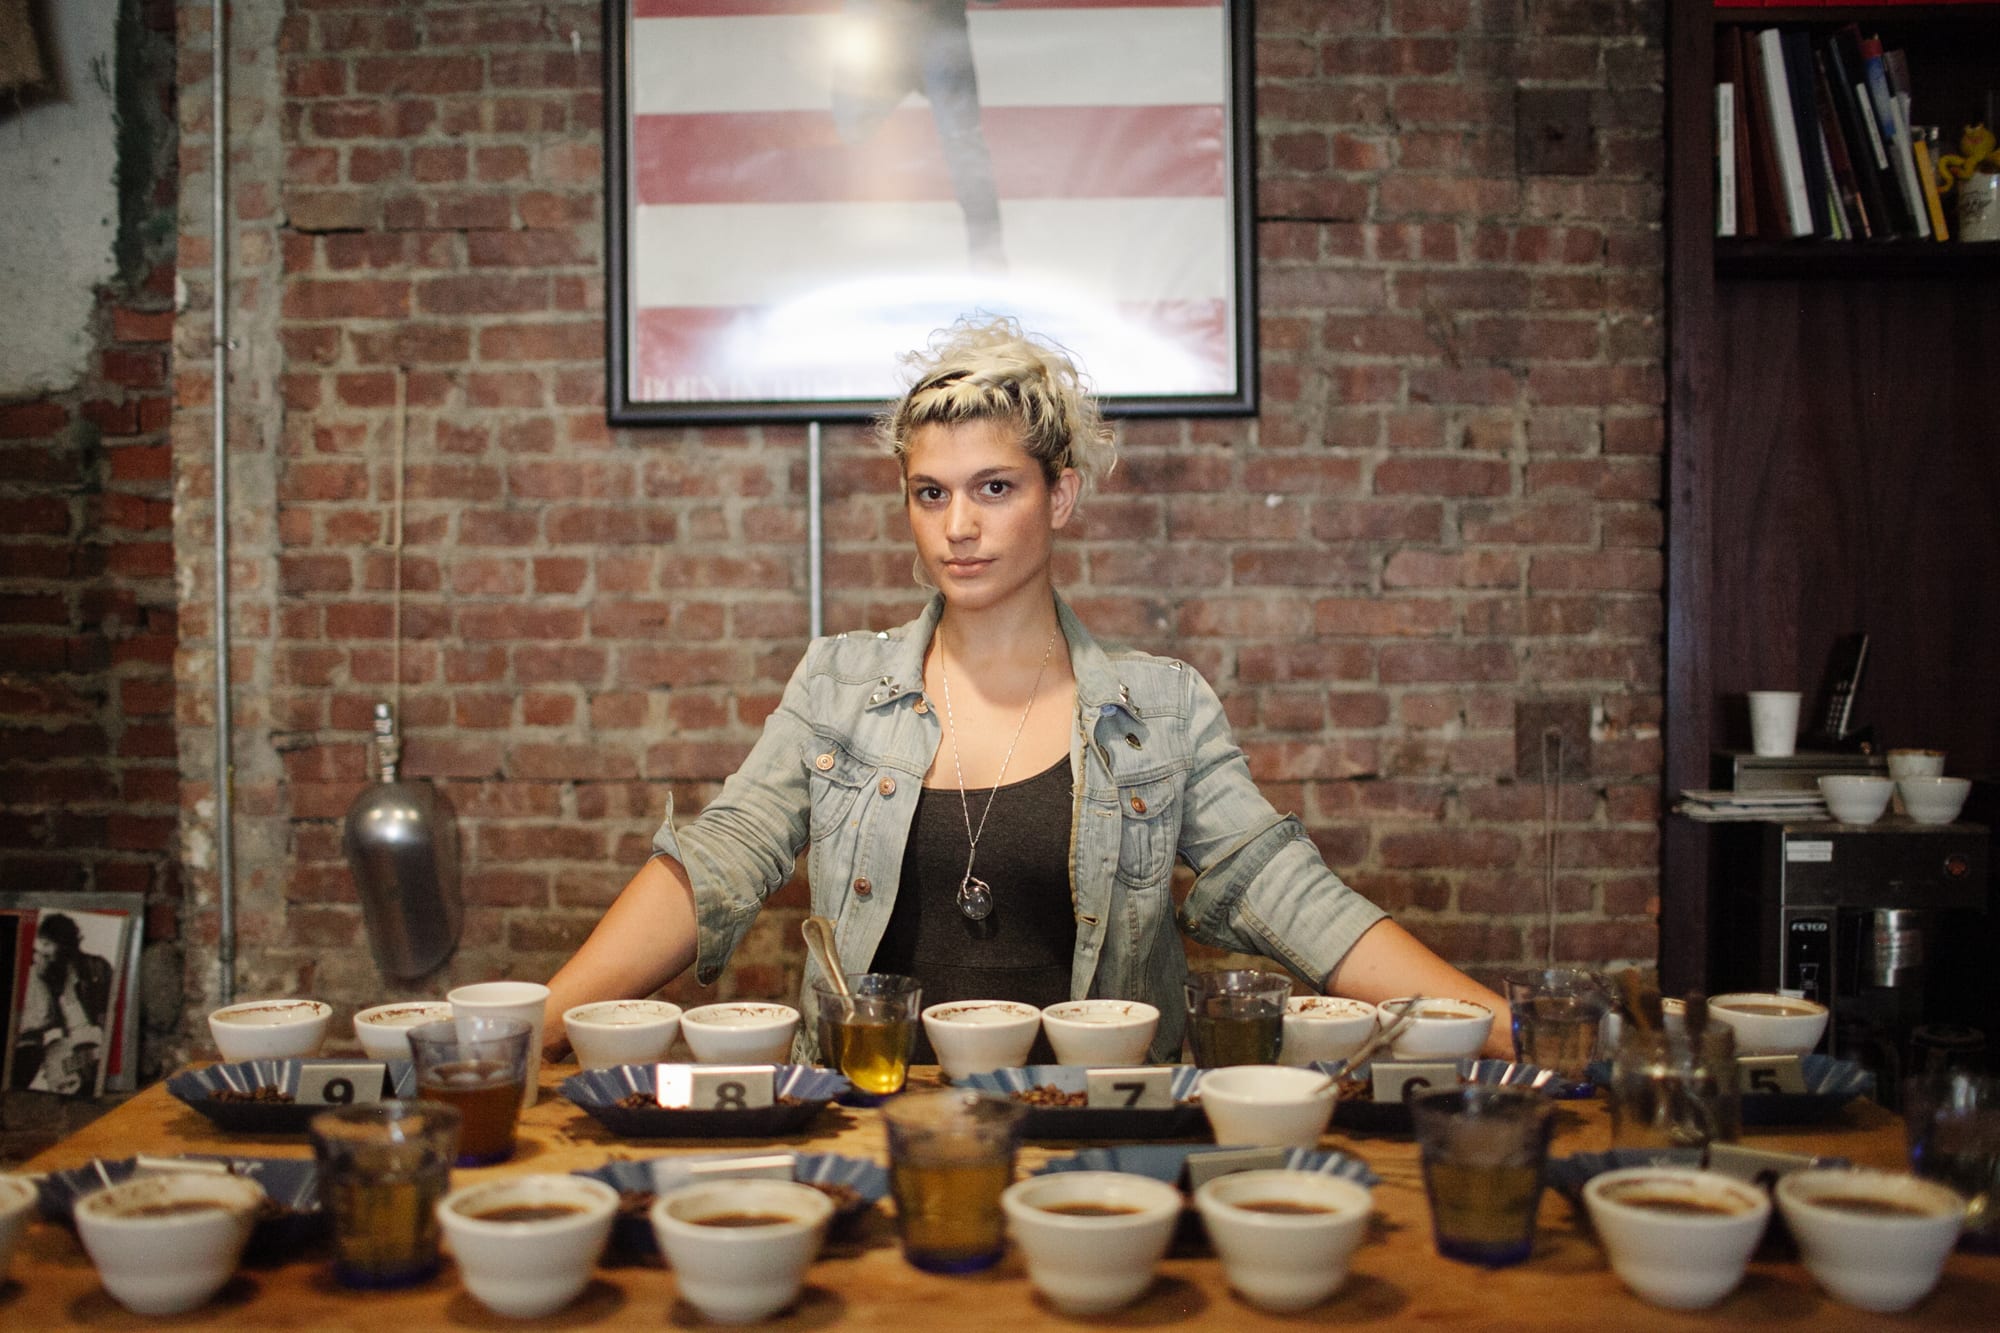 Empire State of Grind: Erika Vonie Leads Expansion at Brooklyn’s Variety Coffee Roasters